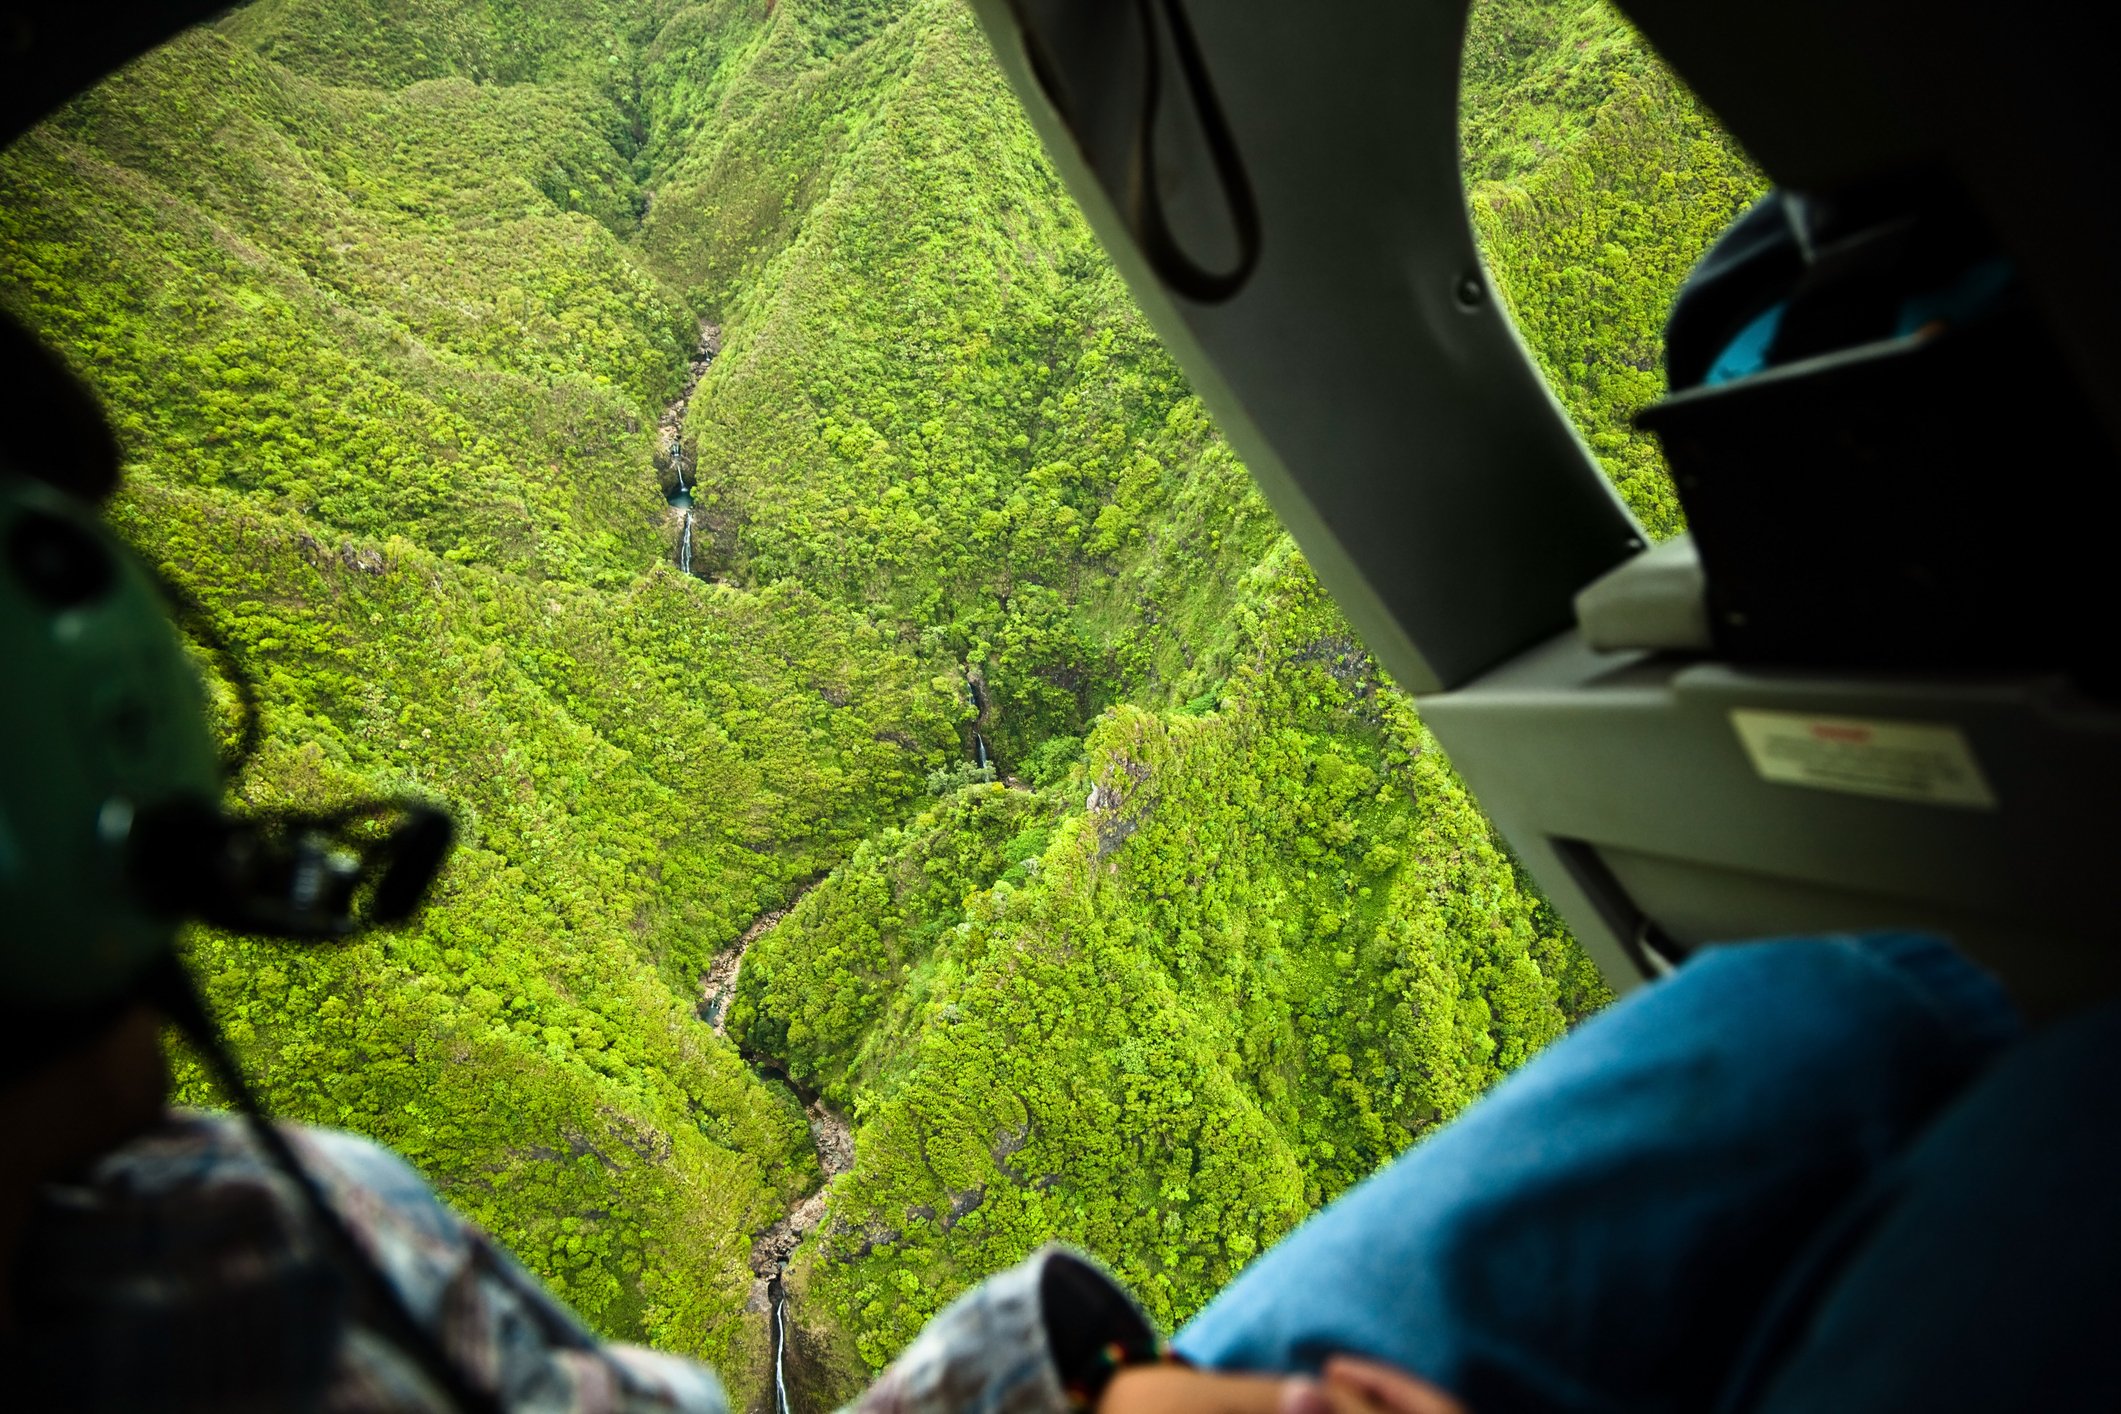 Helicopter ride with open doors over Sacred Falls State Park on Oahu, Hawaii.